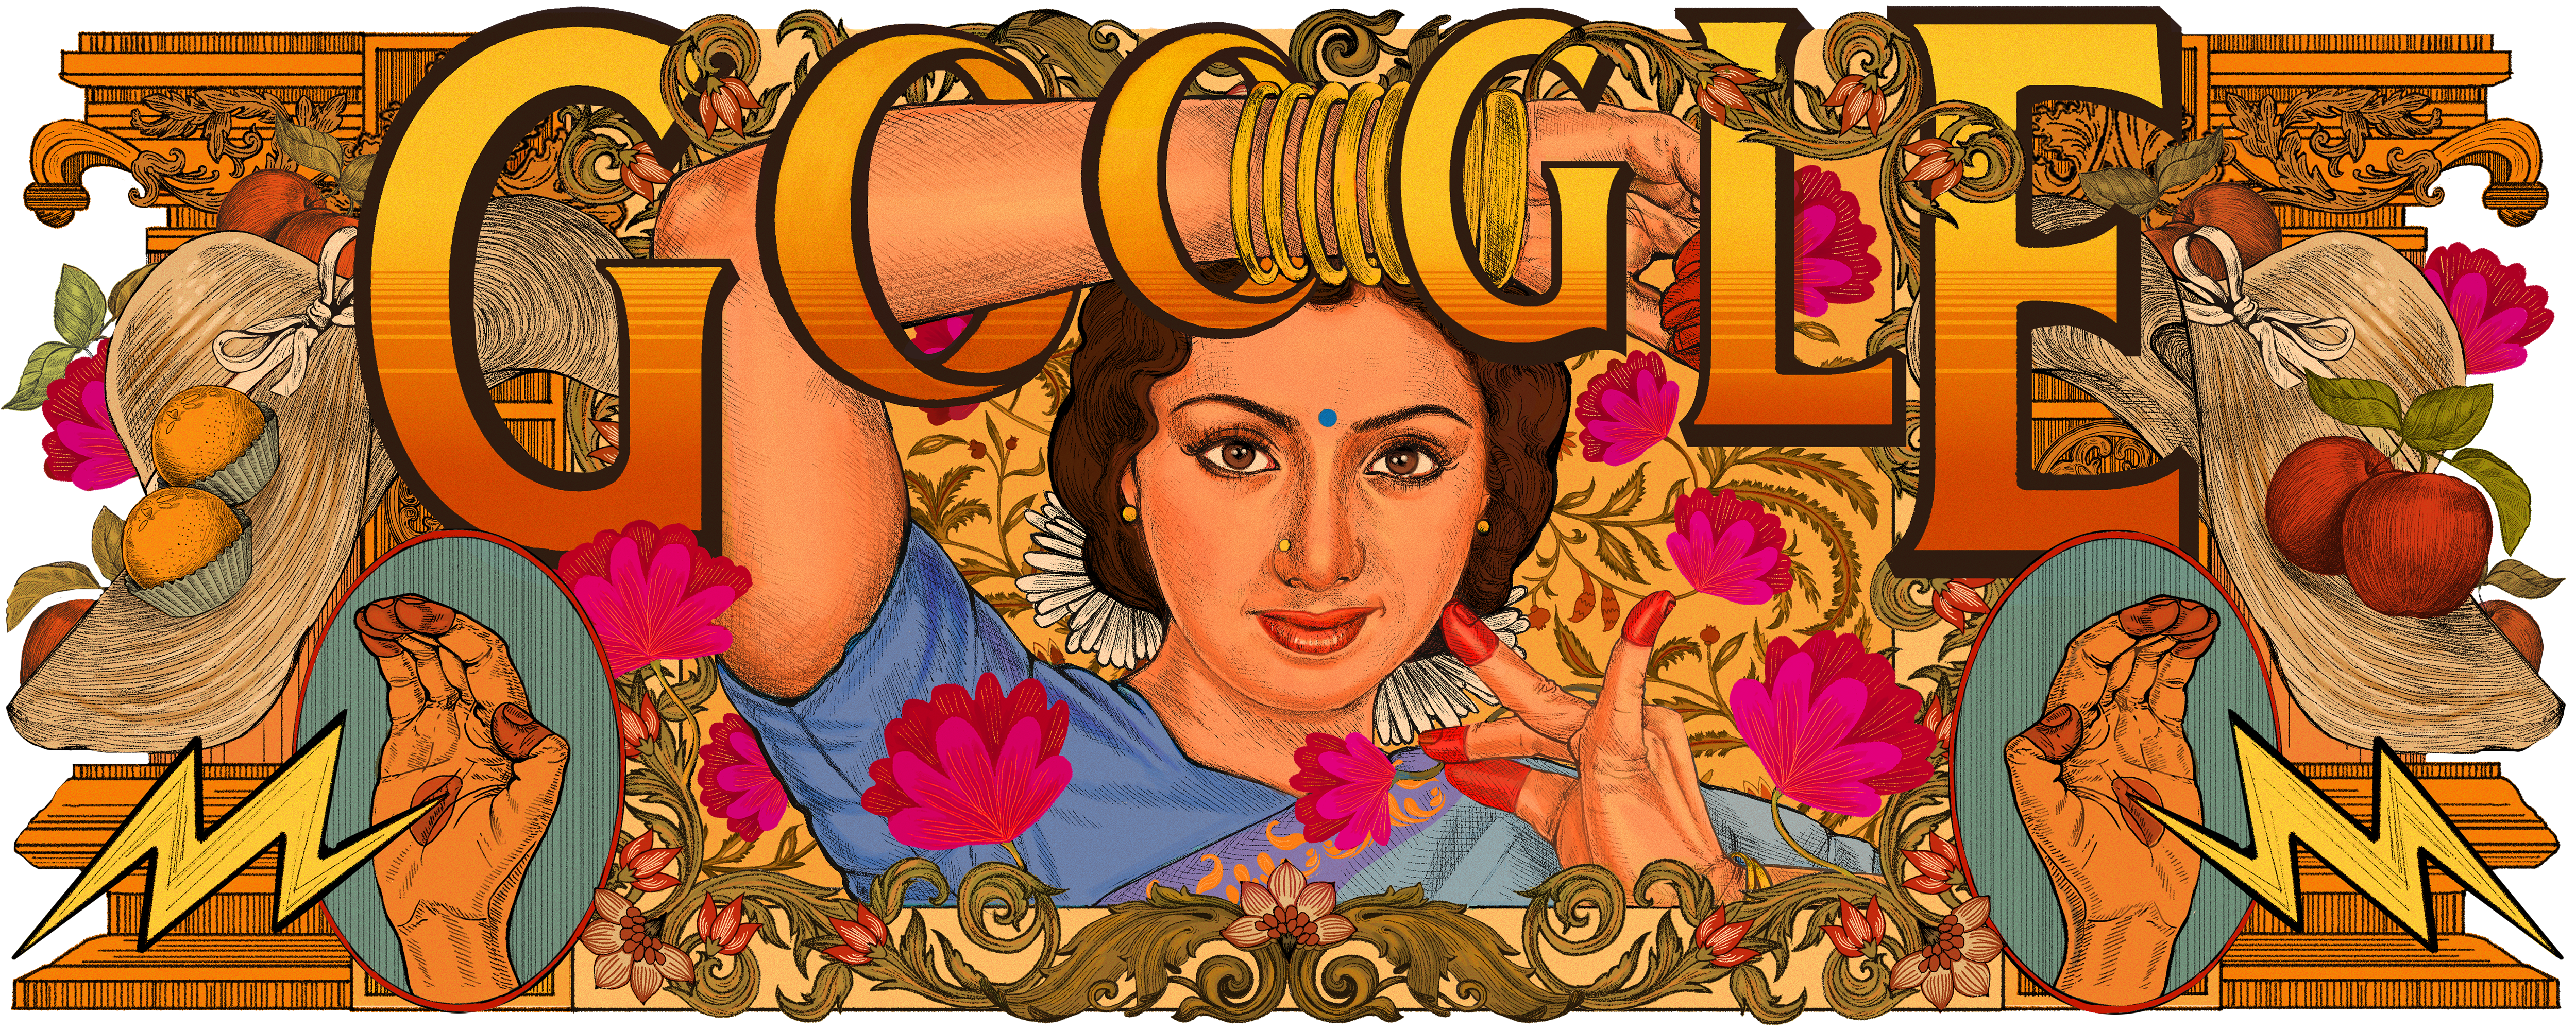 Digital illustration of an Indian woman staring at the viewer, striking a pose with her right hand in the air and left hand by her chin. She has olive skin and dark brown hair and eyes and has a faint smile. She has henna'd fingertips, a gold nose ring, gold bud earrings, and a blue bindi and is wearing a blue sari. The Google logo is spelled above her head with the two Os being represented as gold bangle bracelets on her arm. The rest of the image is ornately decorated with foliage, pink flowers, fruits, hats, and henna'd hands with a yellow lightning bolt coming from them. 